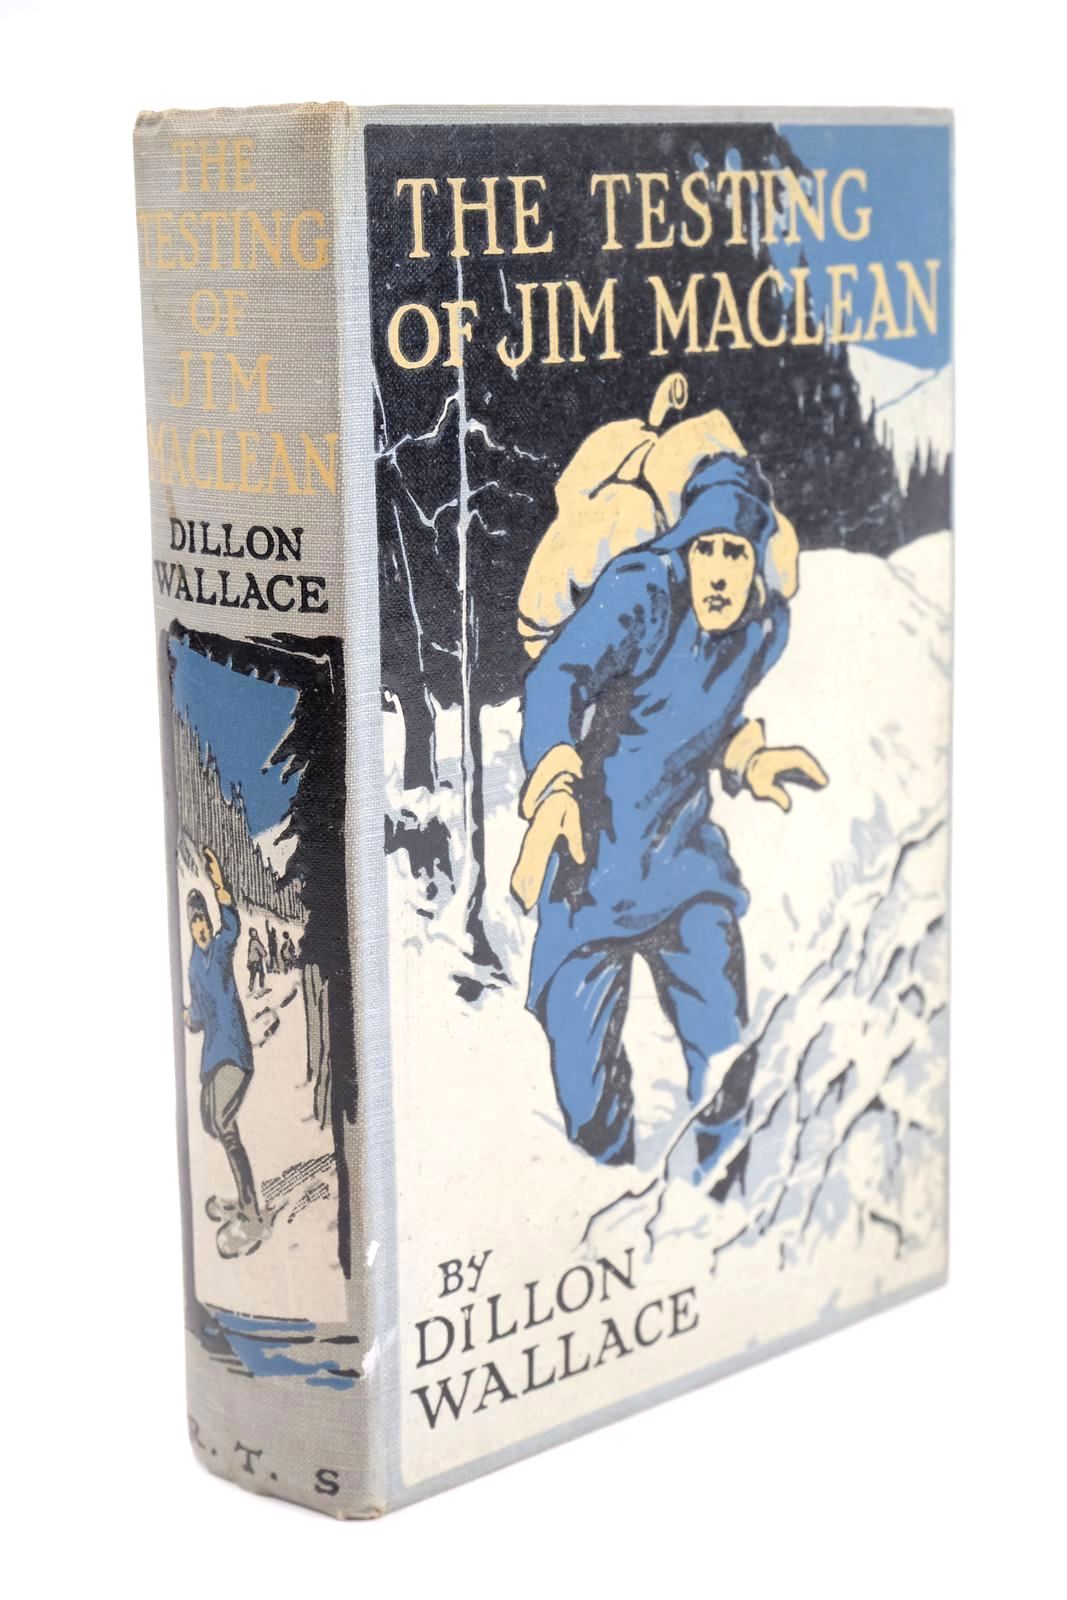 Photo of THE TESTING OF JIM MACLEAN written by Wallace, Dillon published by The Boy's Own Paper (STOCK CODE: 1325247)  for sale by Stella & Rose's Books